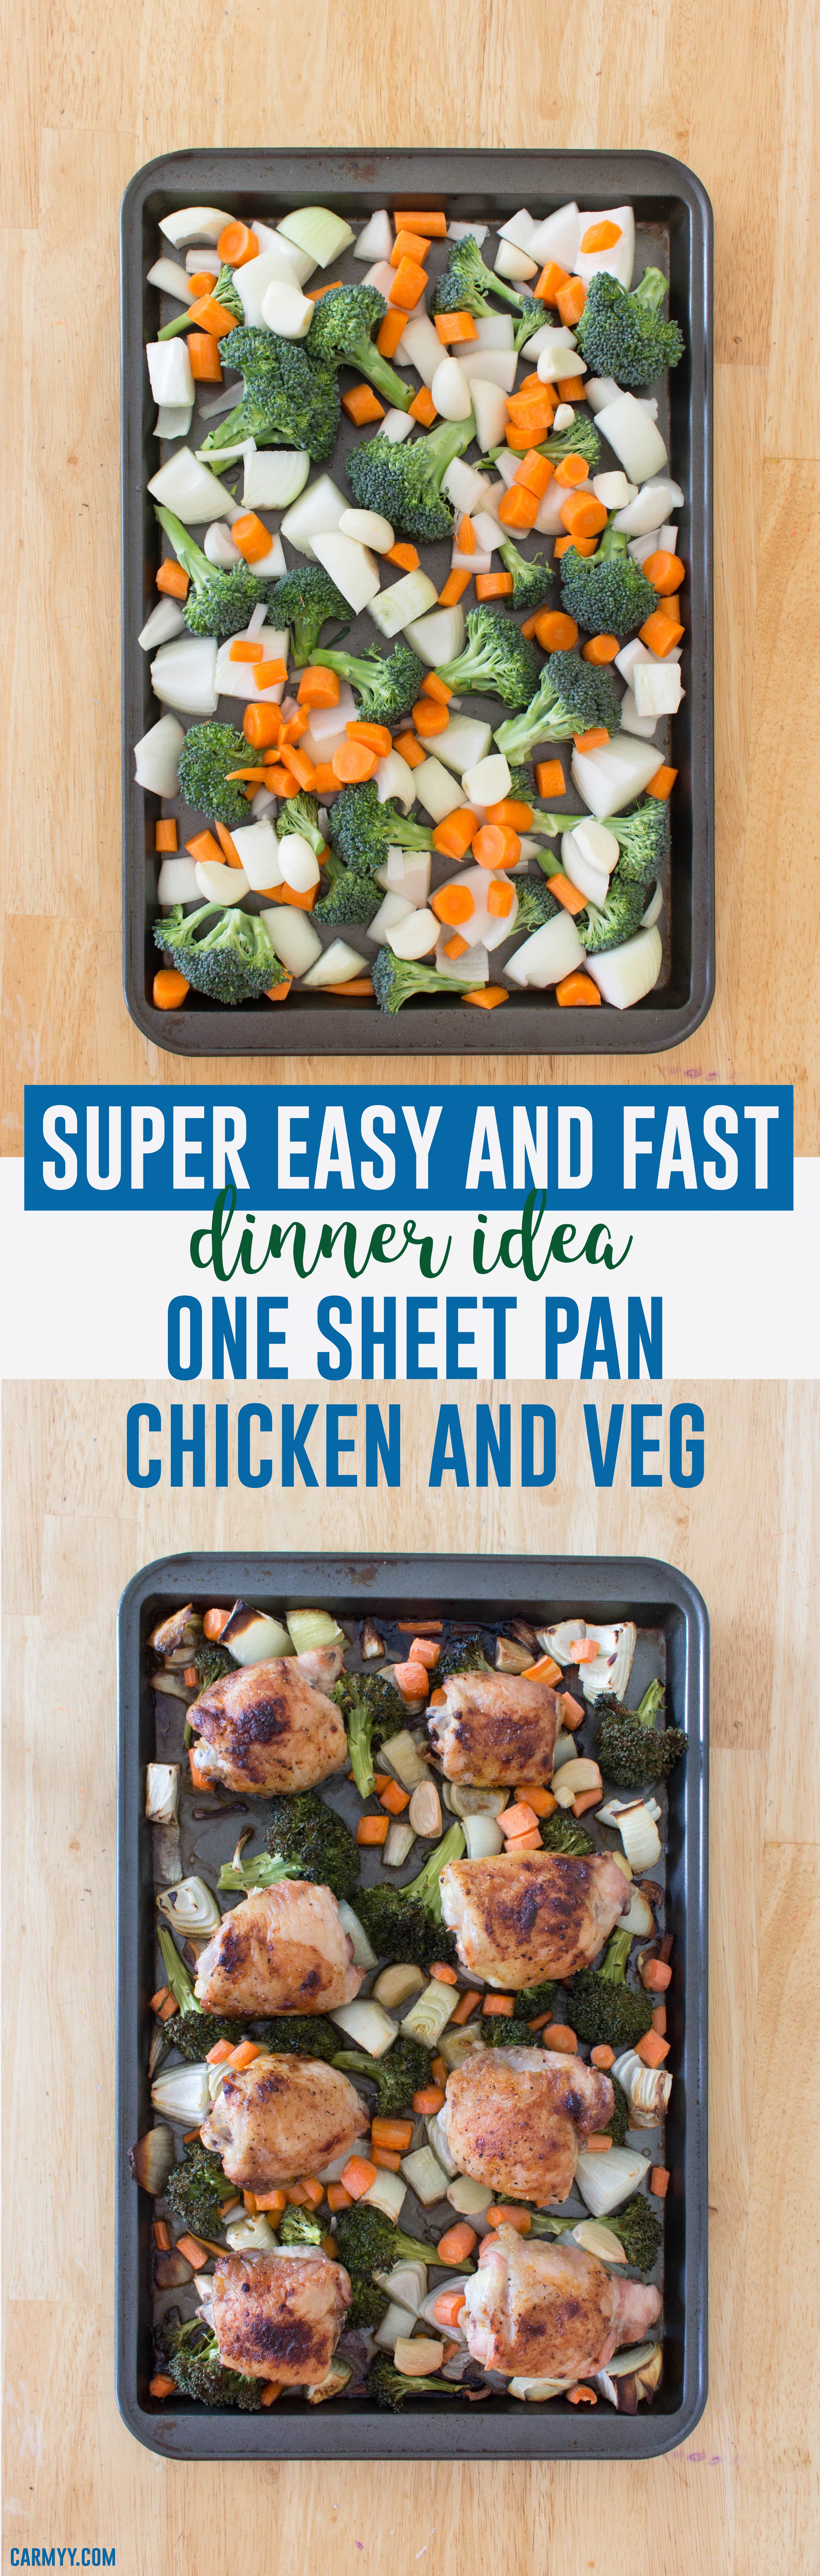 Need to fix something up in a jiffy? This One Sheet Pan Chicken and Vegetable is so fast and easy to make, you'll have dinner in no time!